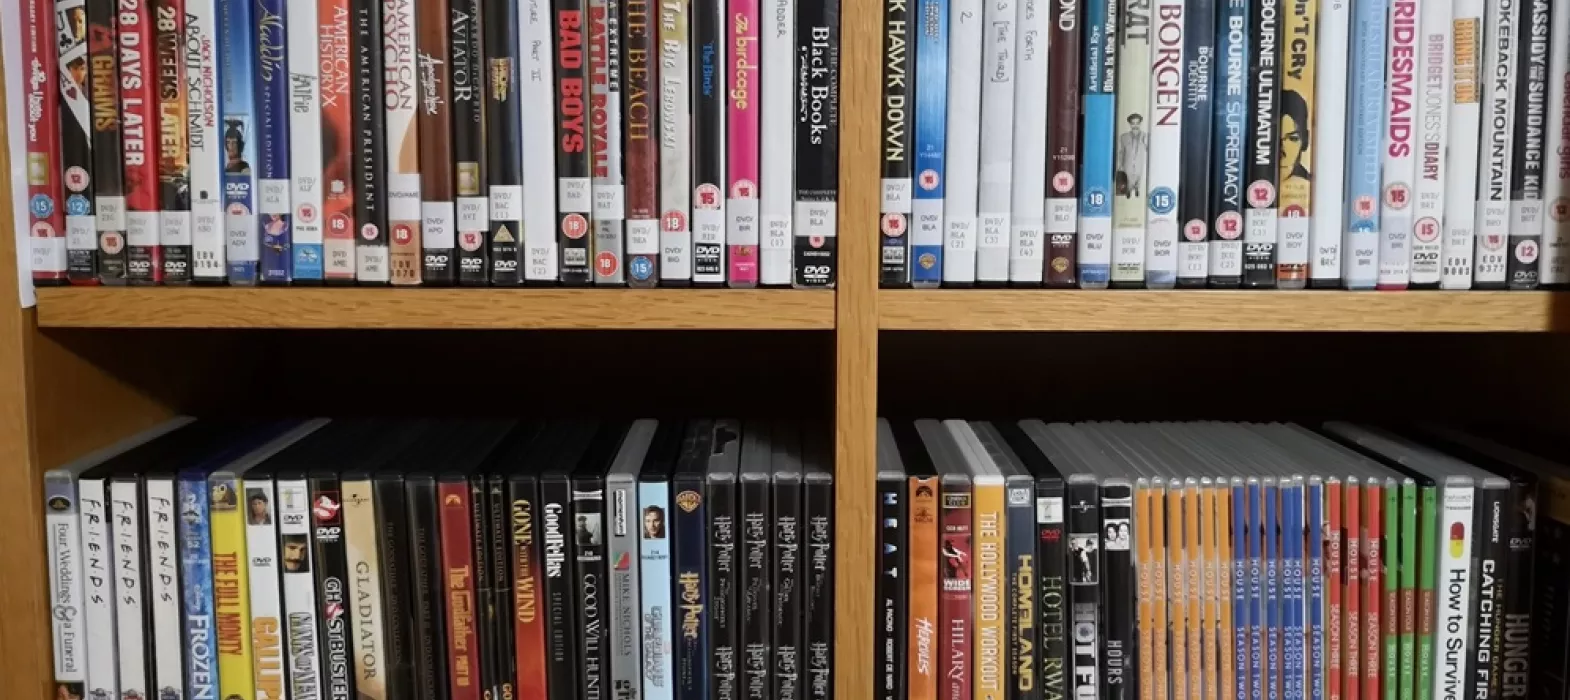 Film Collection, New College Library, Oxford